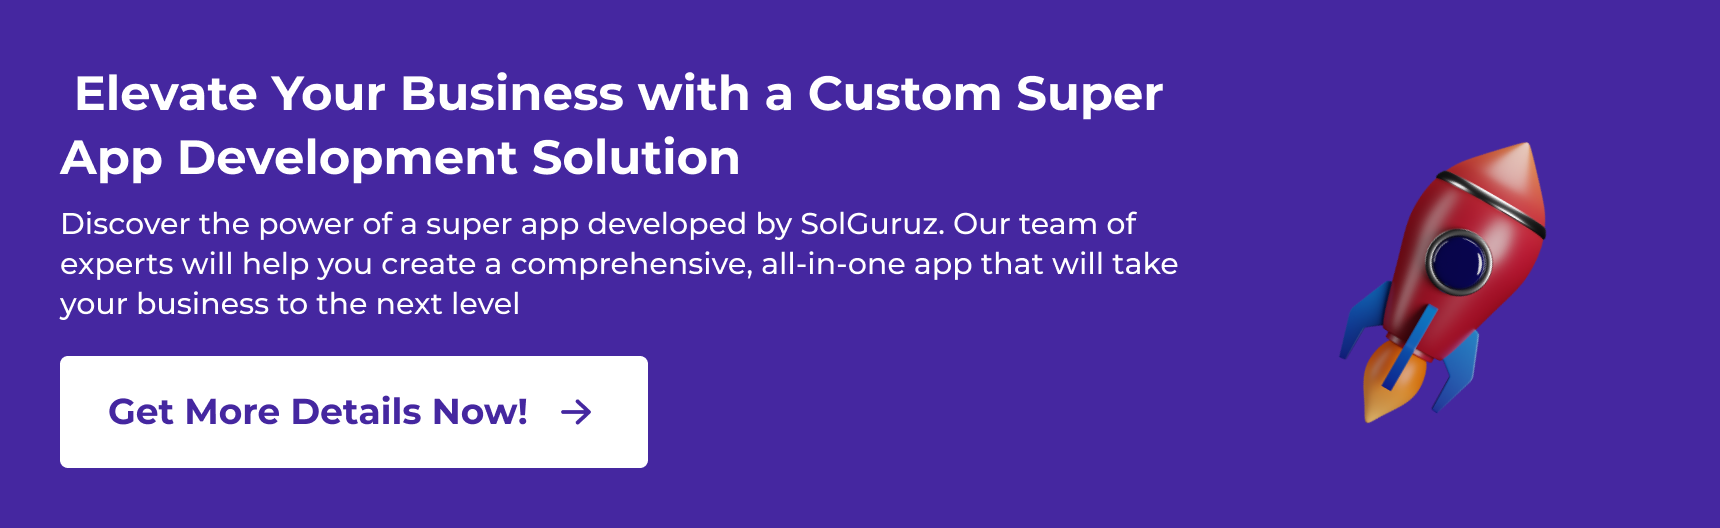 Elevate Your Business with a Custom Super App Development Solution